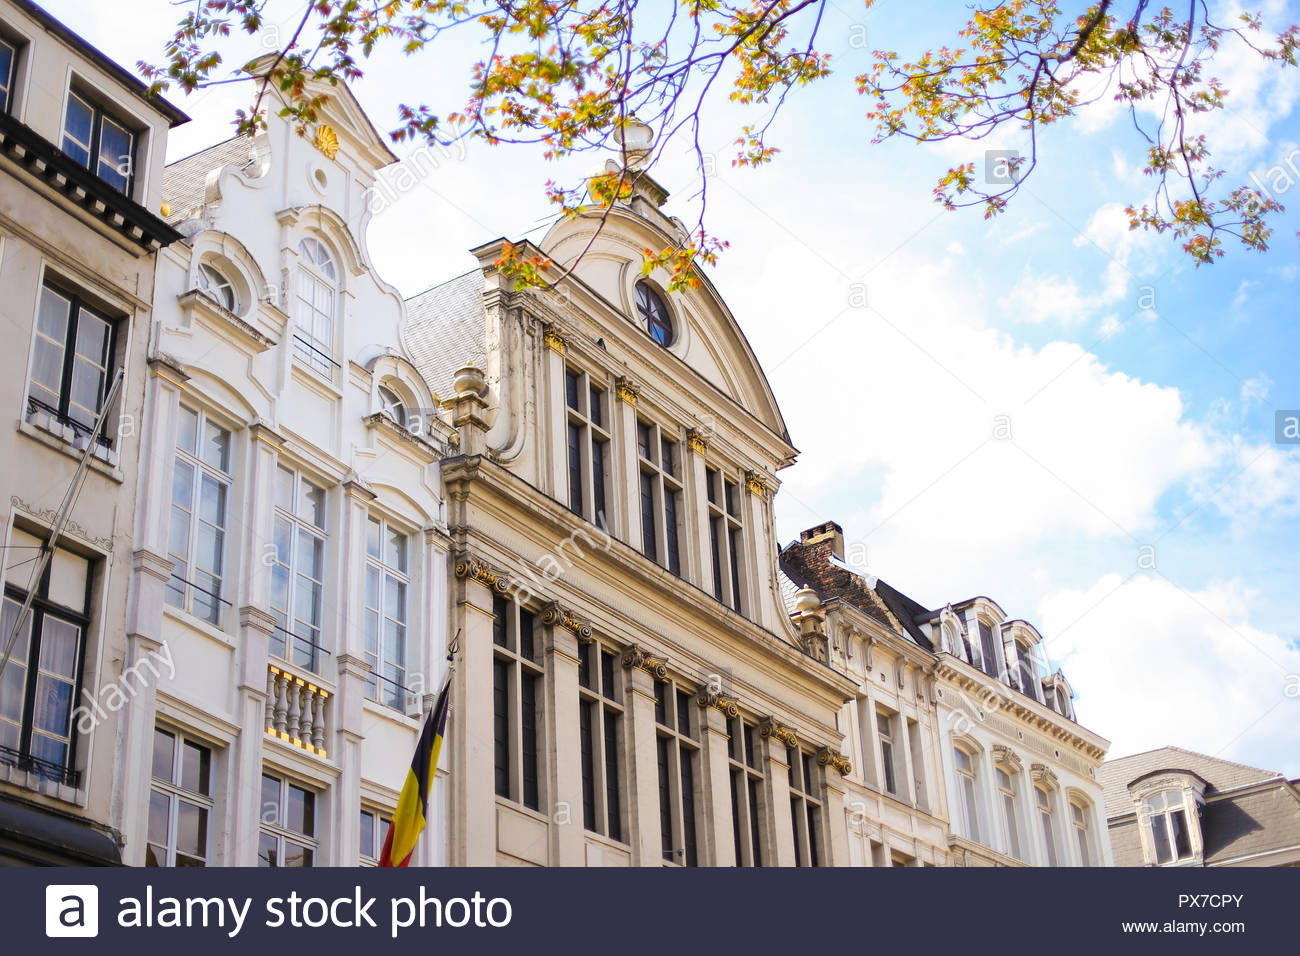 Brussels Buildings On Square In Blue Sky Background Concept Of